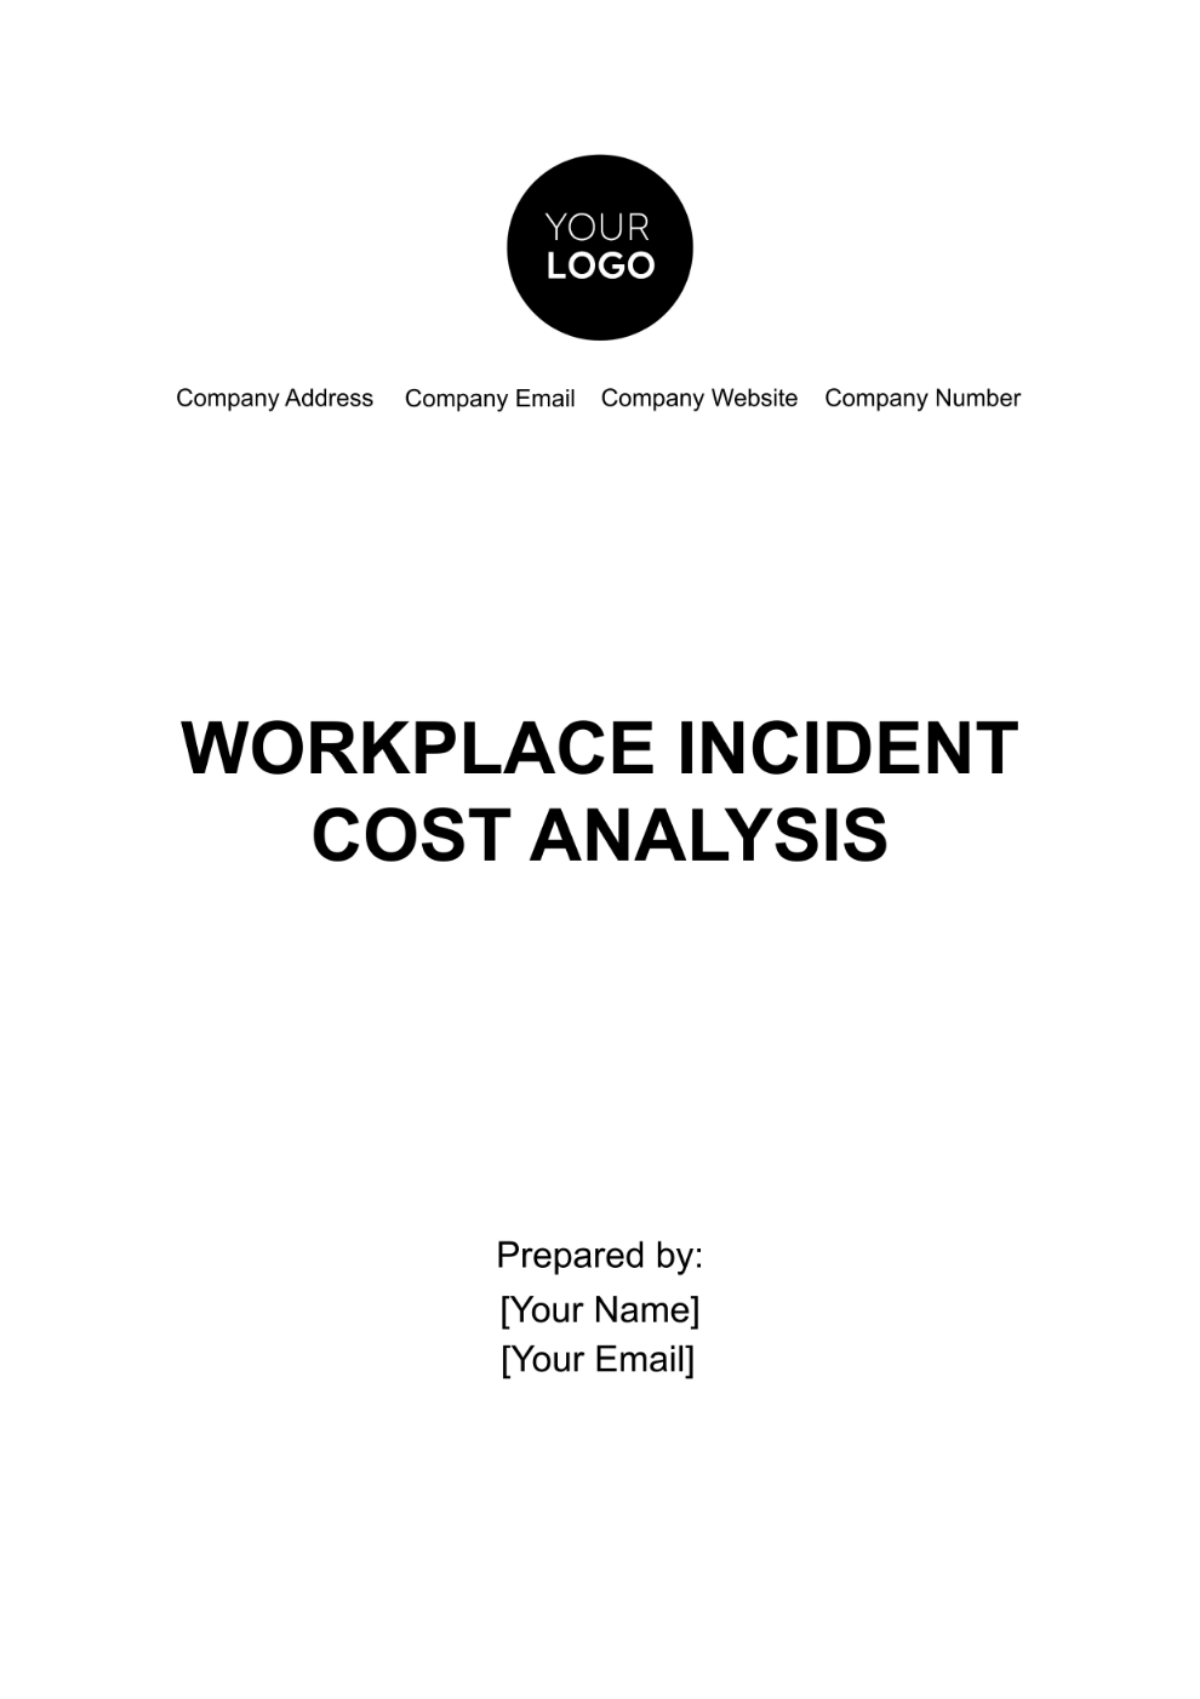 Workplace Incident Cost Analysis Template